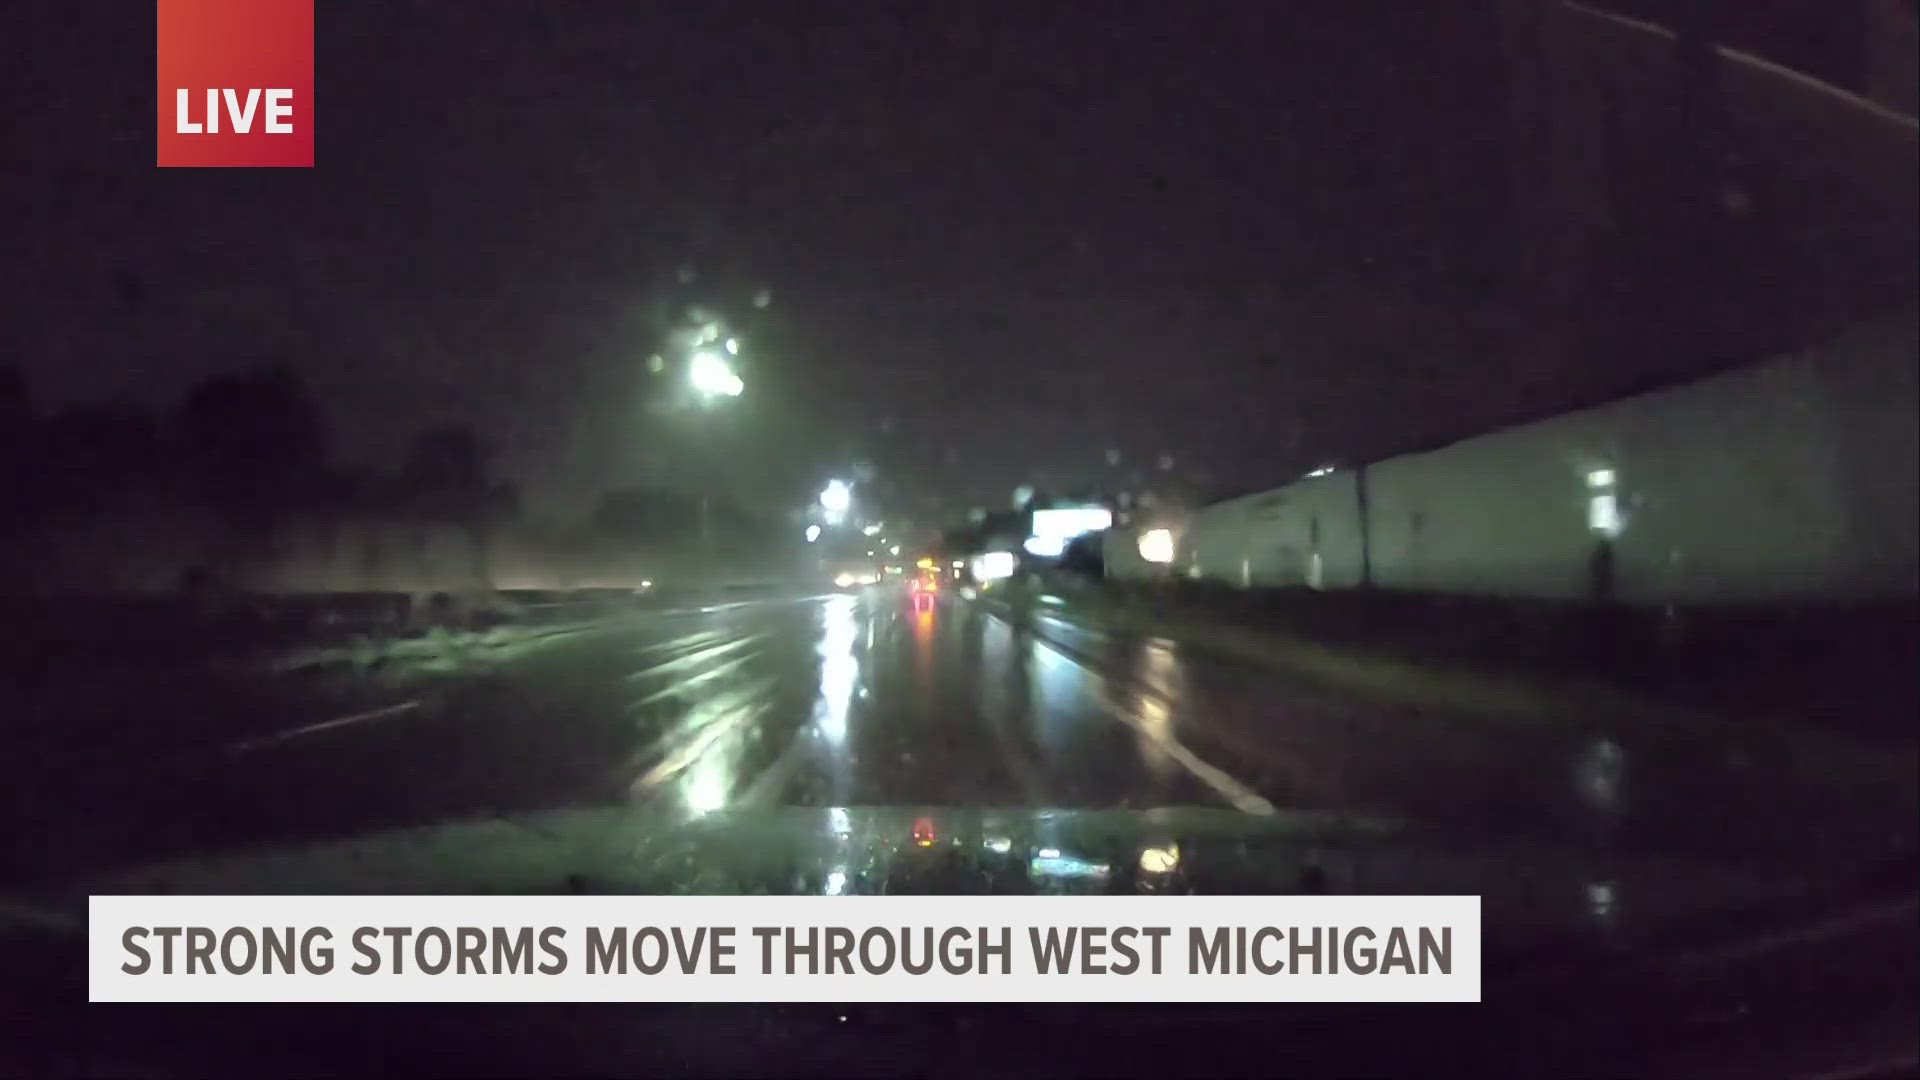 Grand Rapids has been hit with heavy rain most of Wednesday night.